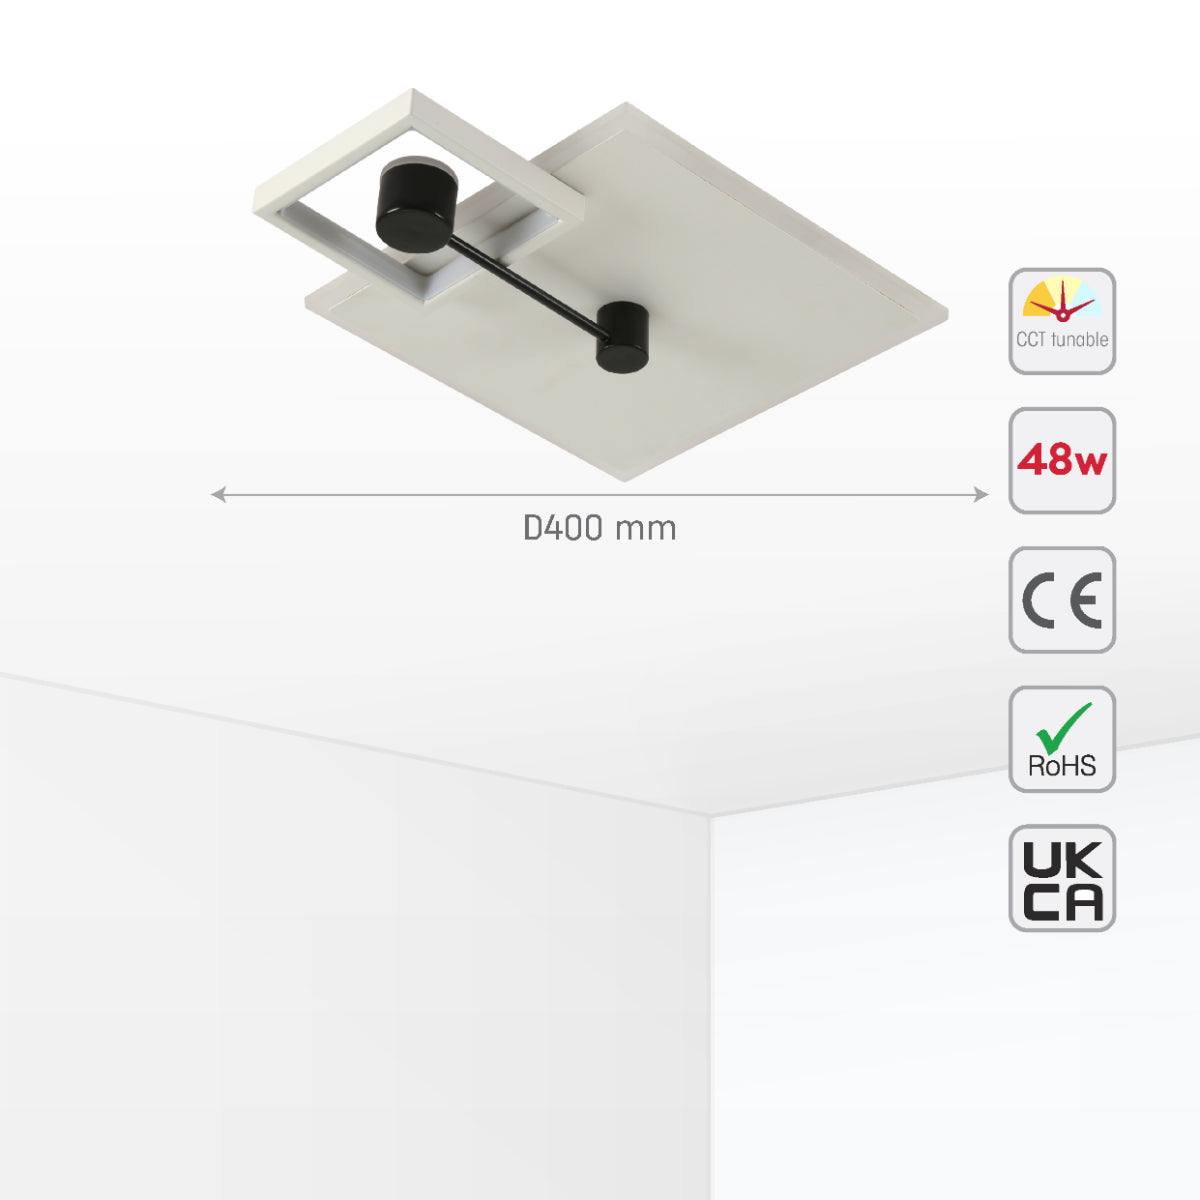 Size and certifications of Modern Squared LED Flush Ceiling Fixture 159-18109